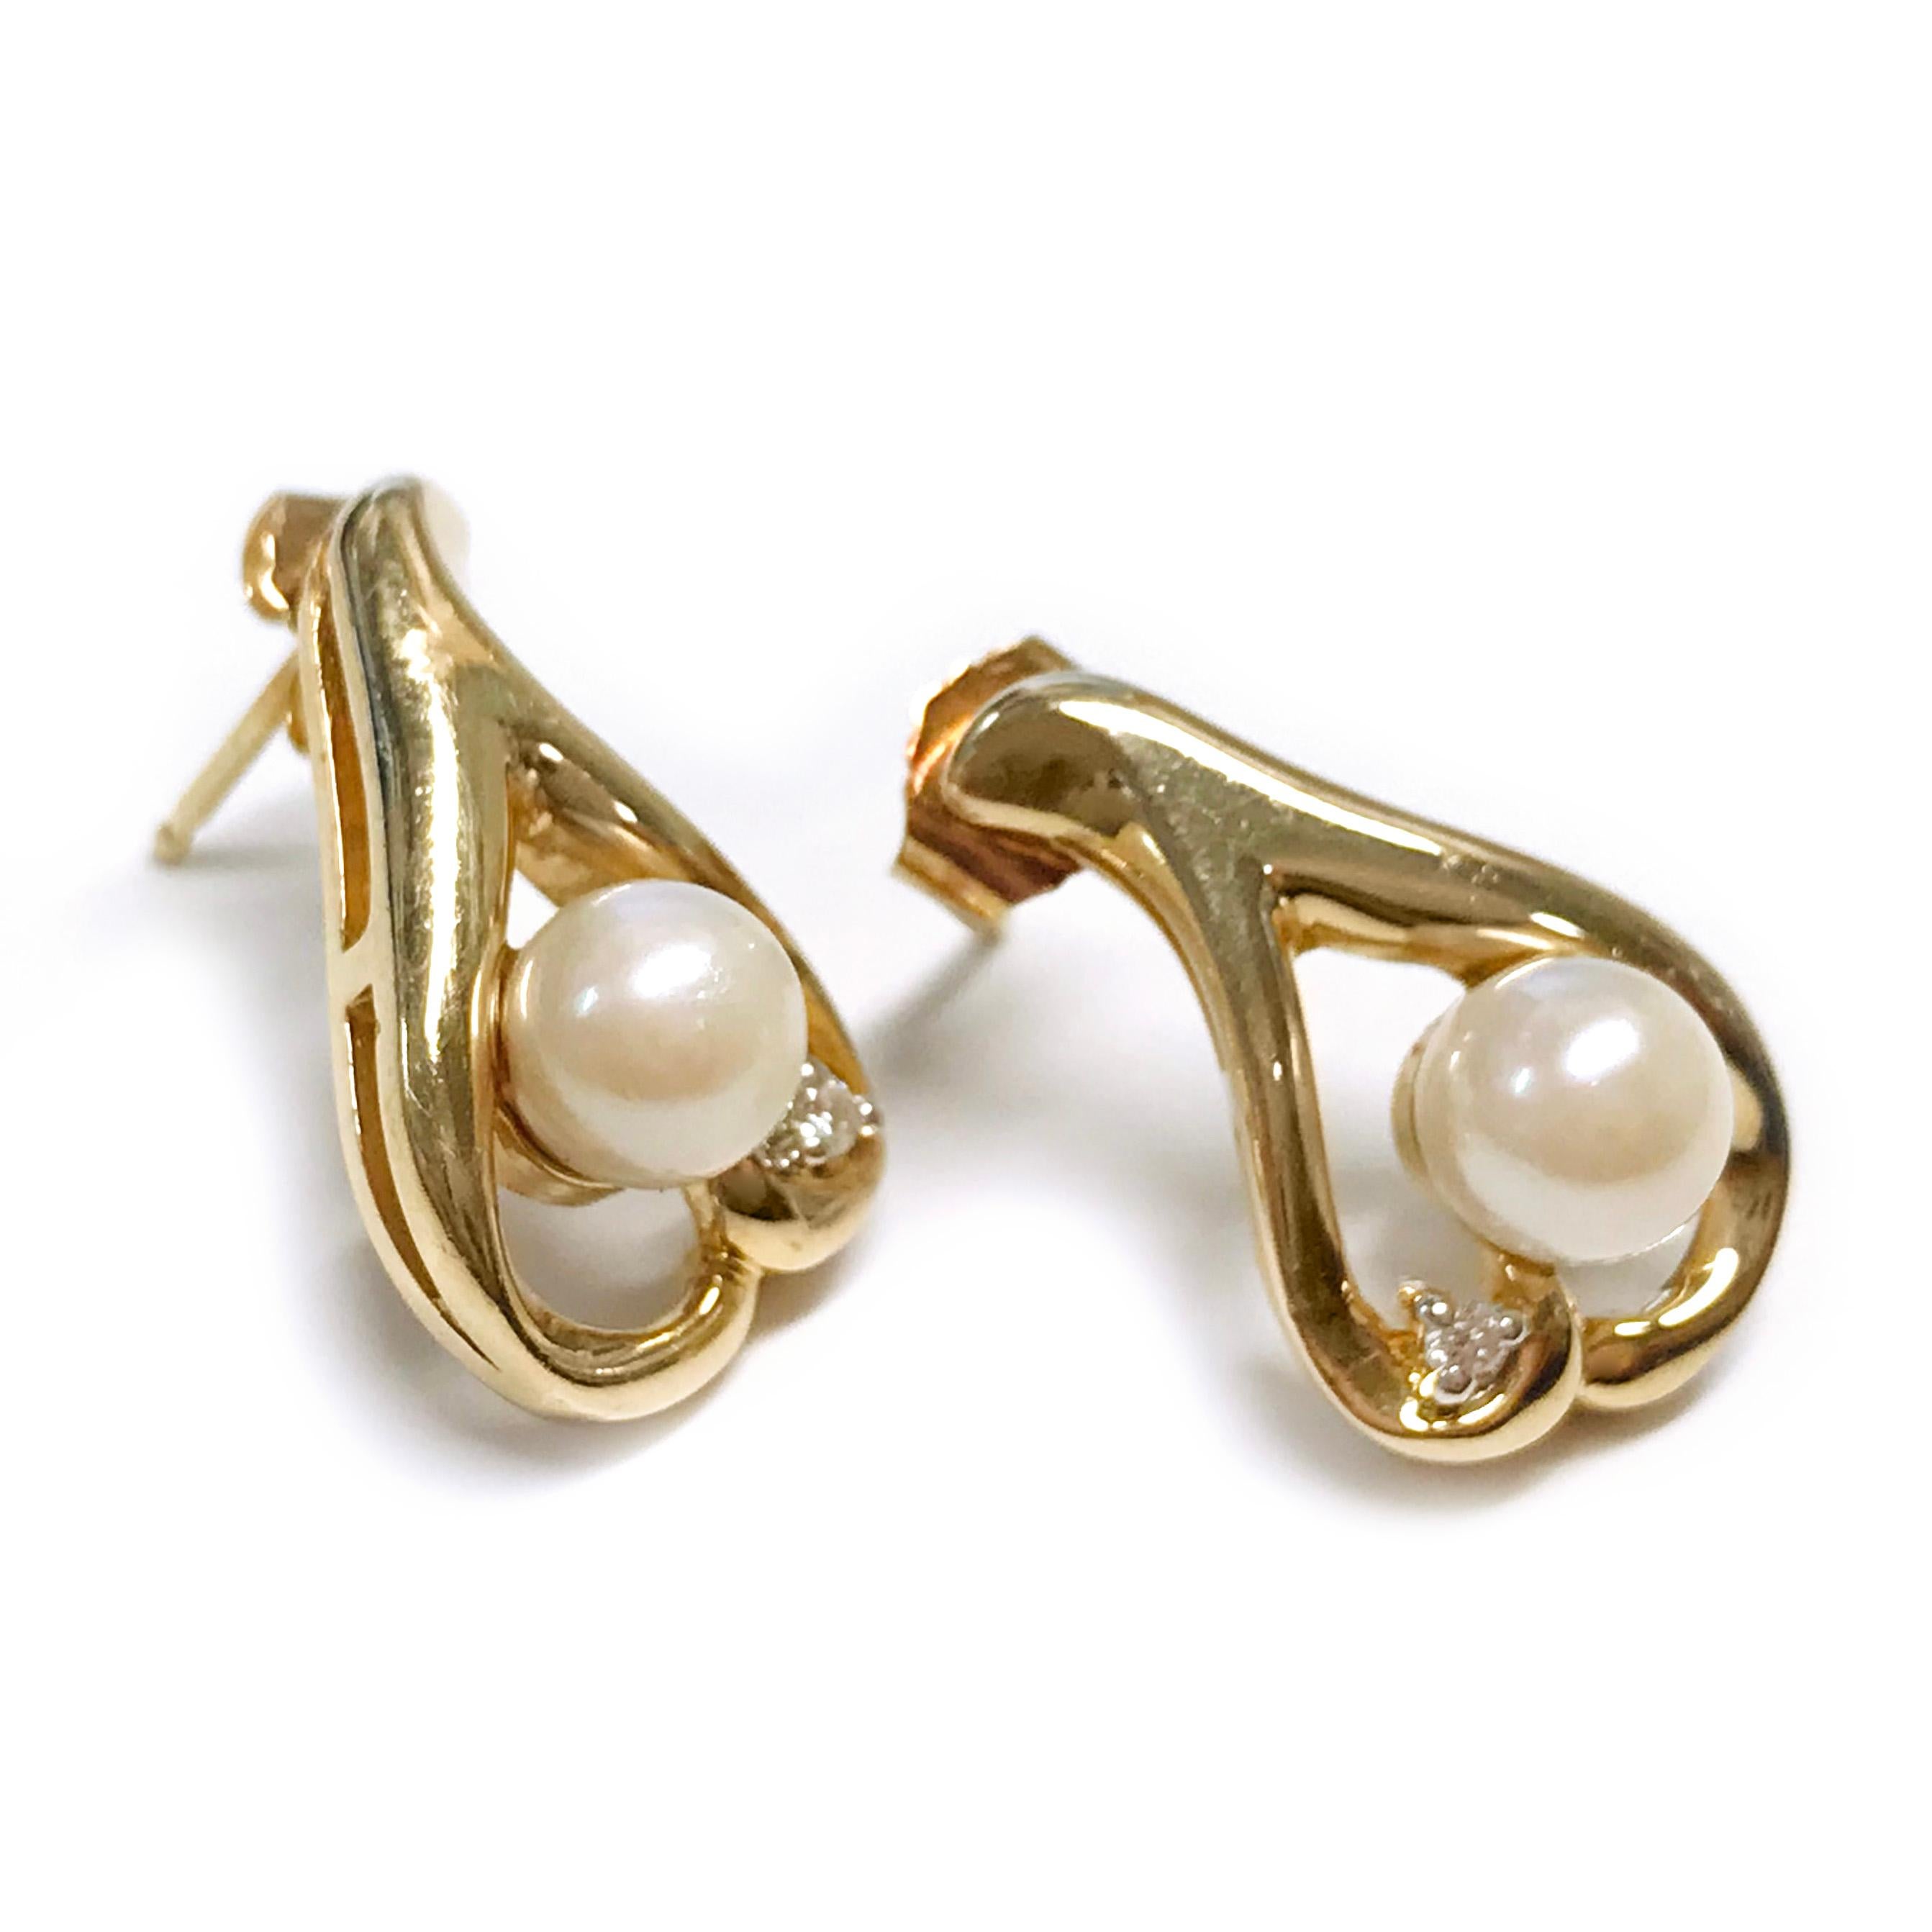 14 Karat Freshwater Pearl Diamond Earrings. Each earring features a freshwater Pearl and diamond set on a double swoosh that forms a teardrop. The two 6.5mm Pearls are A grade: cream, pinkish; lightly blemished; good shape; good luster. Two melee